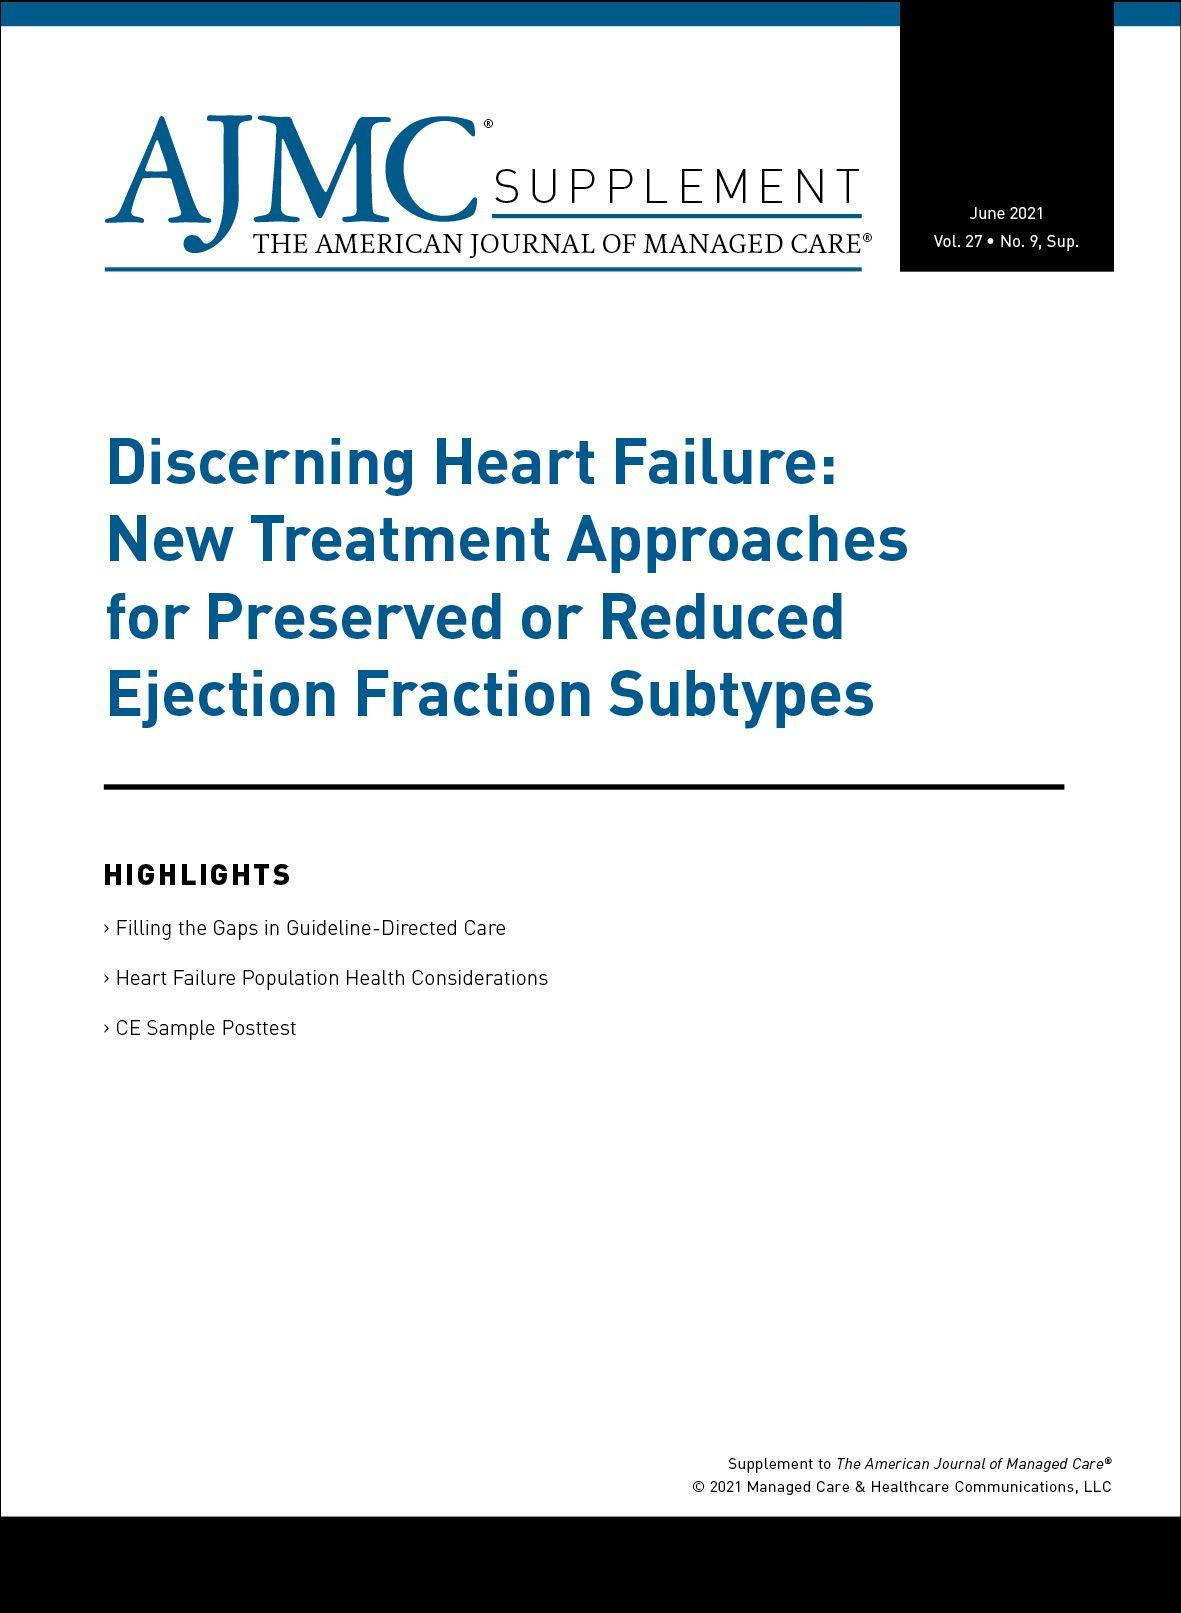 Discerning Heart Failure: New Treatment Approaches for Preserved or Reduced Ejection Fraction Subtypes